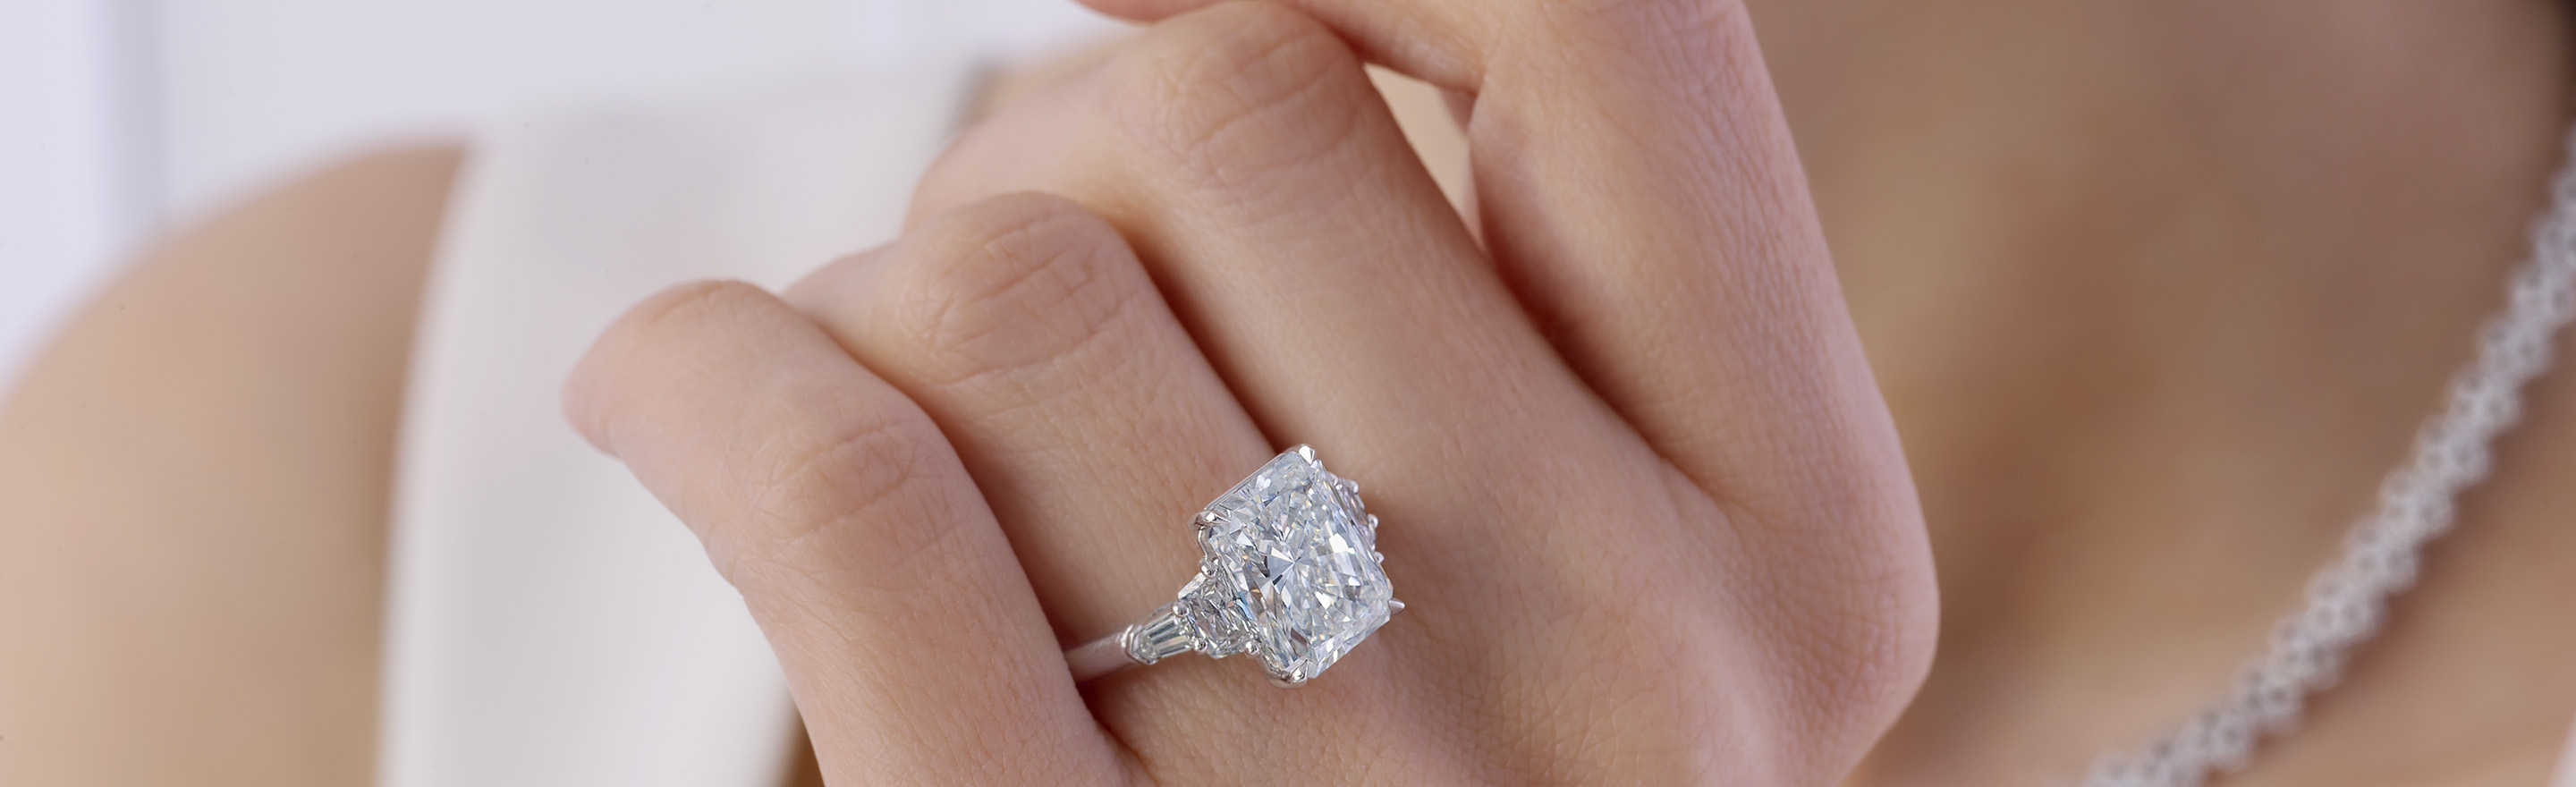 31 Unique & Alternative Engagement Rings for One-of-a-Kind Couples -  hitched.co.uk